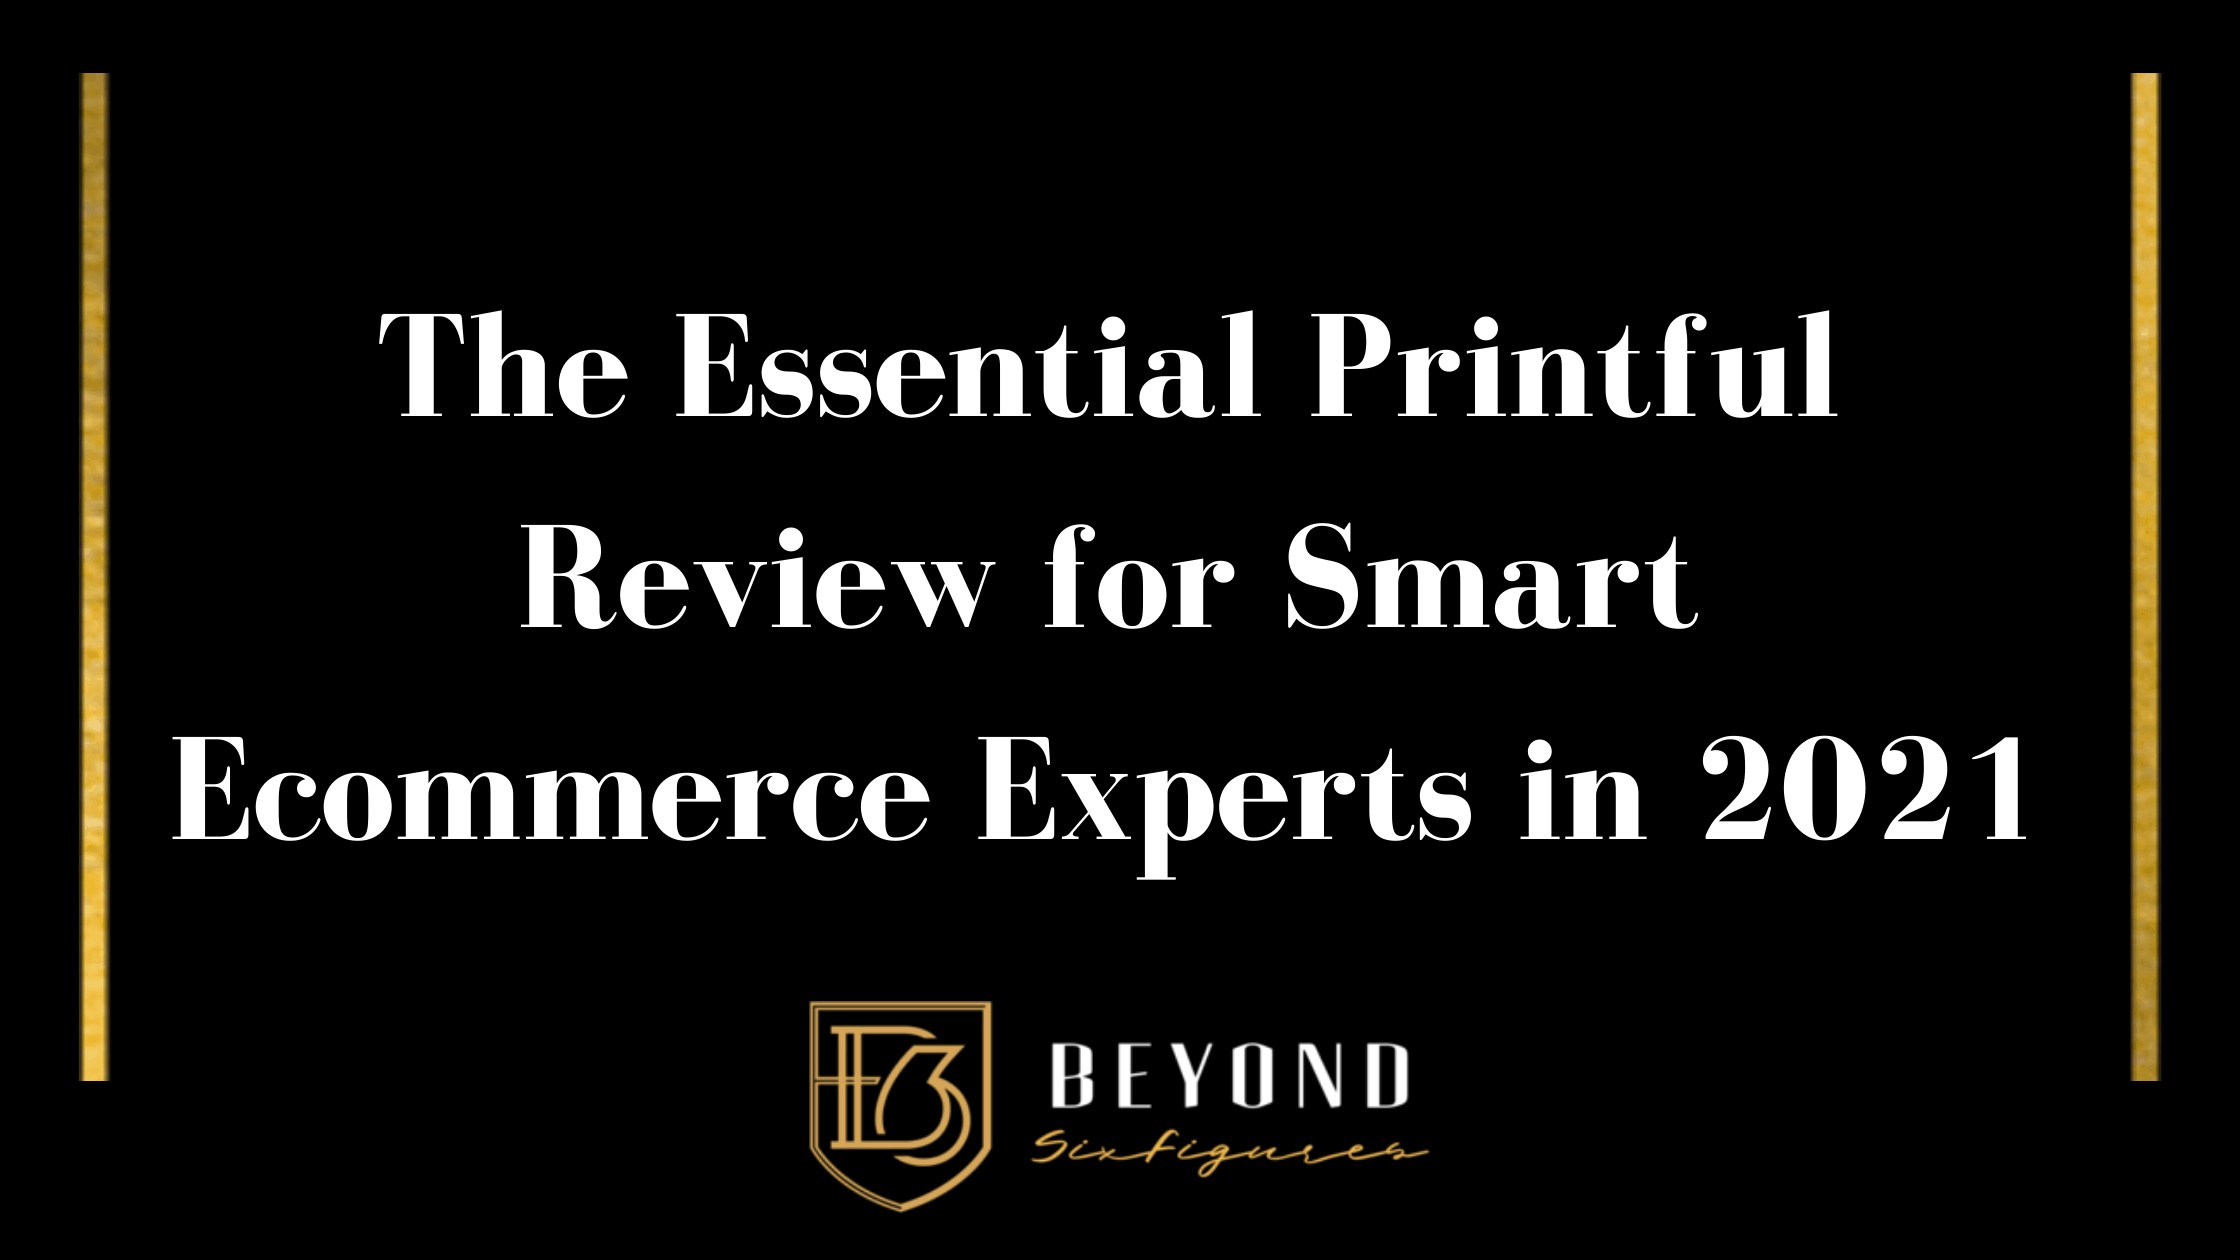 Blog banner for The Essential Printful Review for Smart Ecommerce Experts in 2021